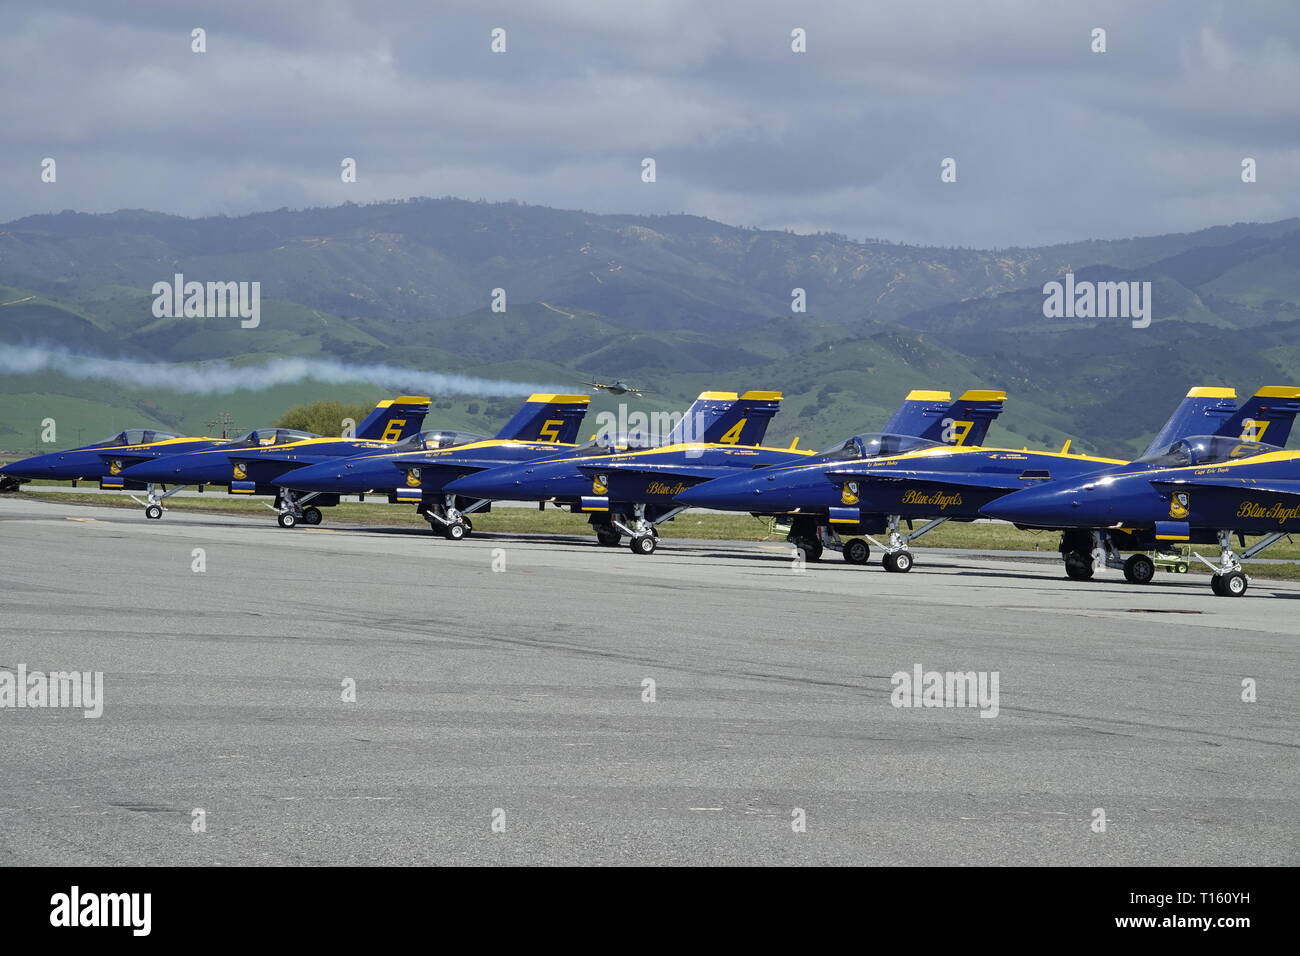 California, USA. 23rd Mar, 2019. 23rd March, 2019   Salinas, California, USA      Scvenes from the annual  Salinas Air-Show, featuring the US Navy 'Blue Angels' arobatic team: here Jerry Conley in the post WW2 Vampire jet careers over the jets of the Blue Angels  at 450 mph. Credit: Motofoto/Alamy Live News Stock Photo